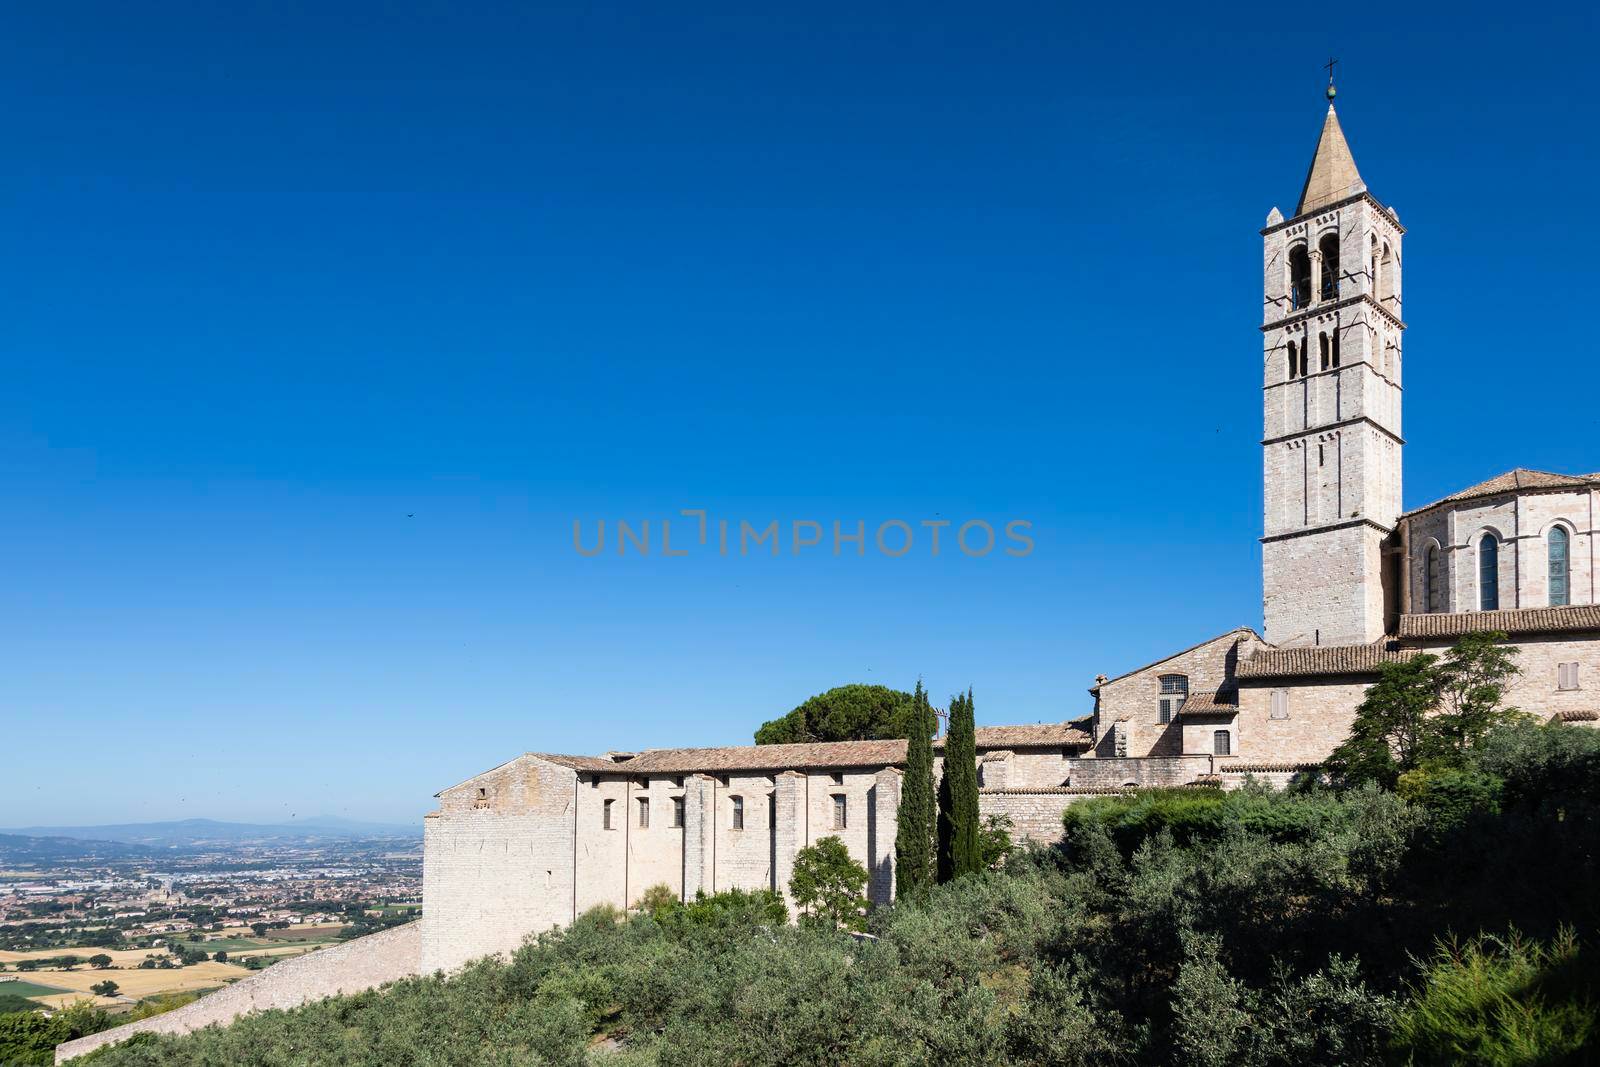 Church in Assisi village in Umbria region, Italy. The town is famous for the most important Italian Basilica dedicated to St. Francis - San Francesco. by Perseomedusa